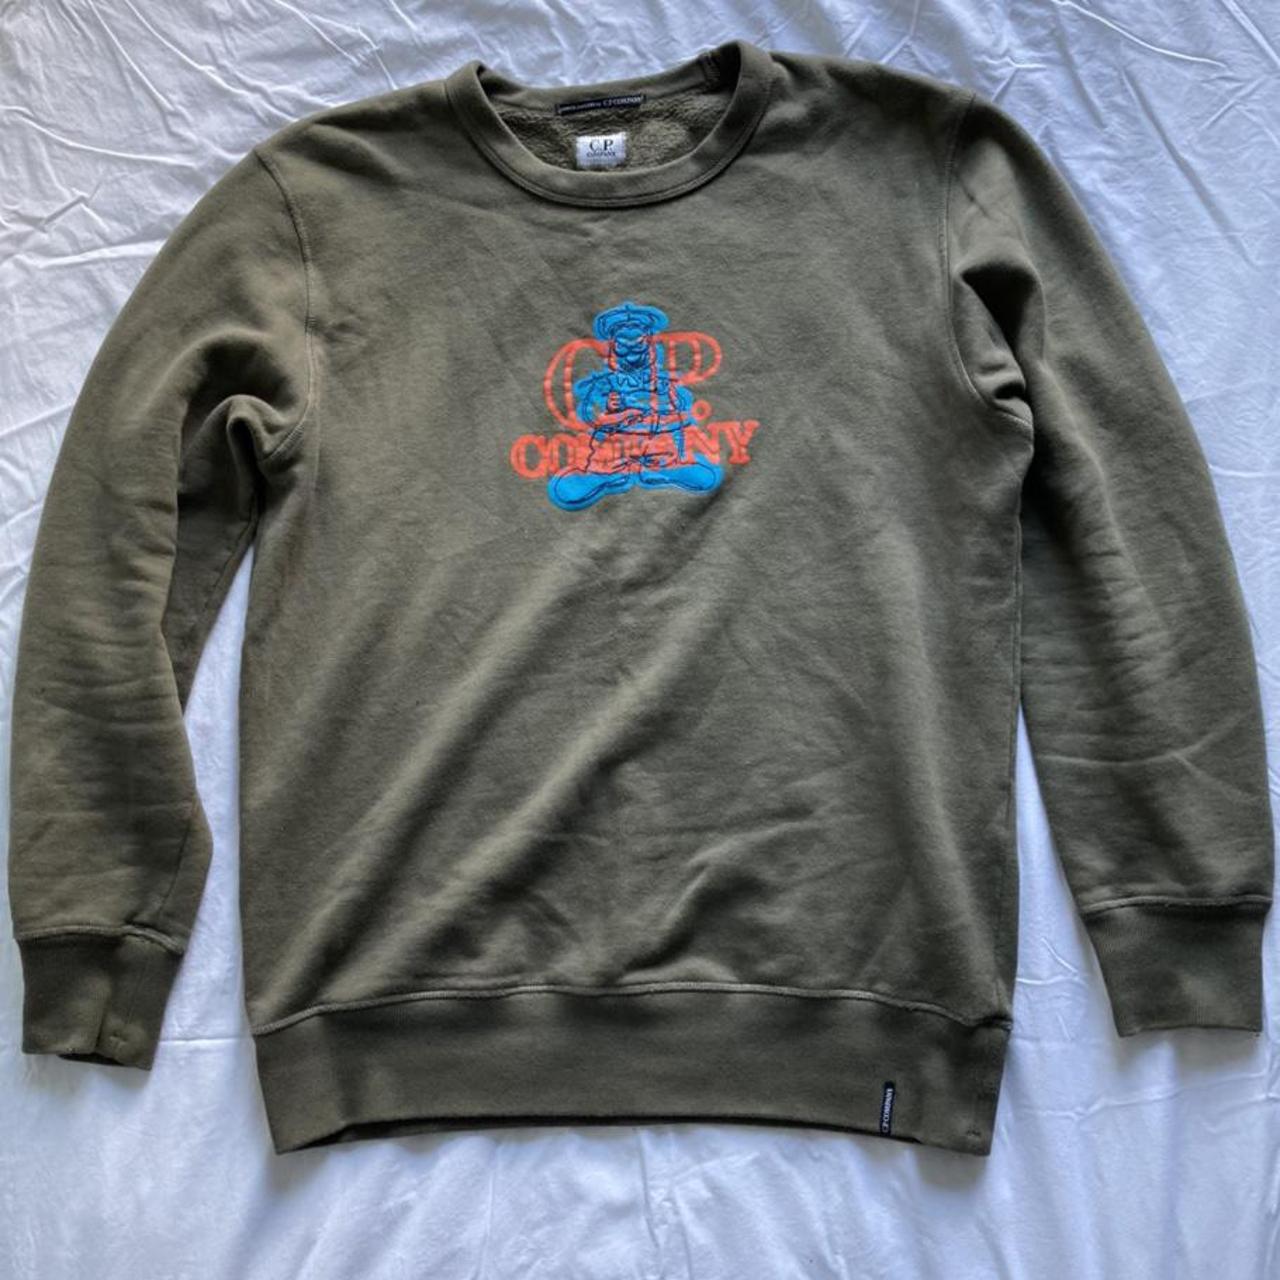 🦚 CP COMPANY SWEATER 🦚 10/10 CONDITION 🦚 SIZE LARGE... - Depop